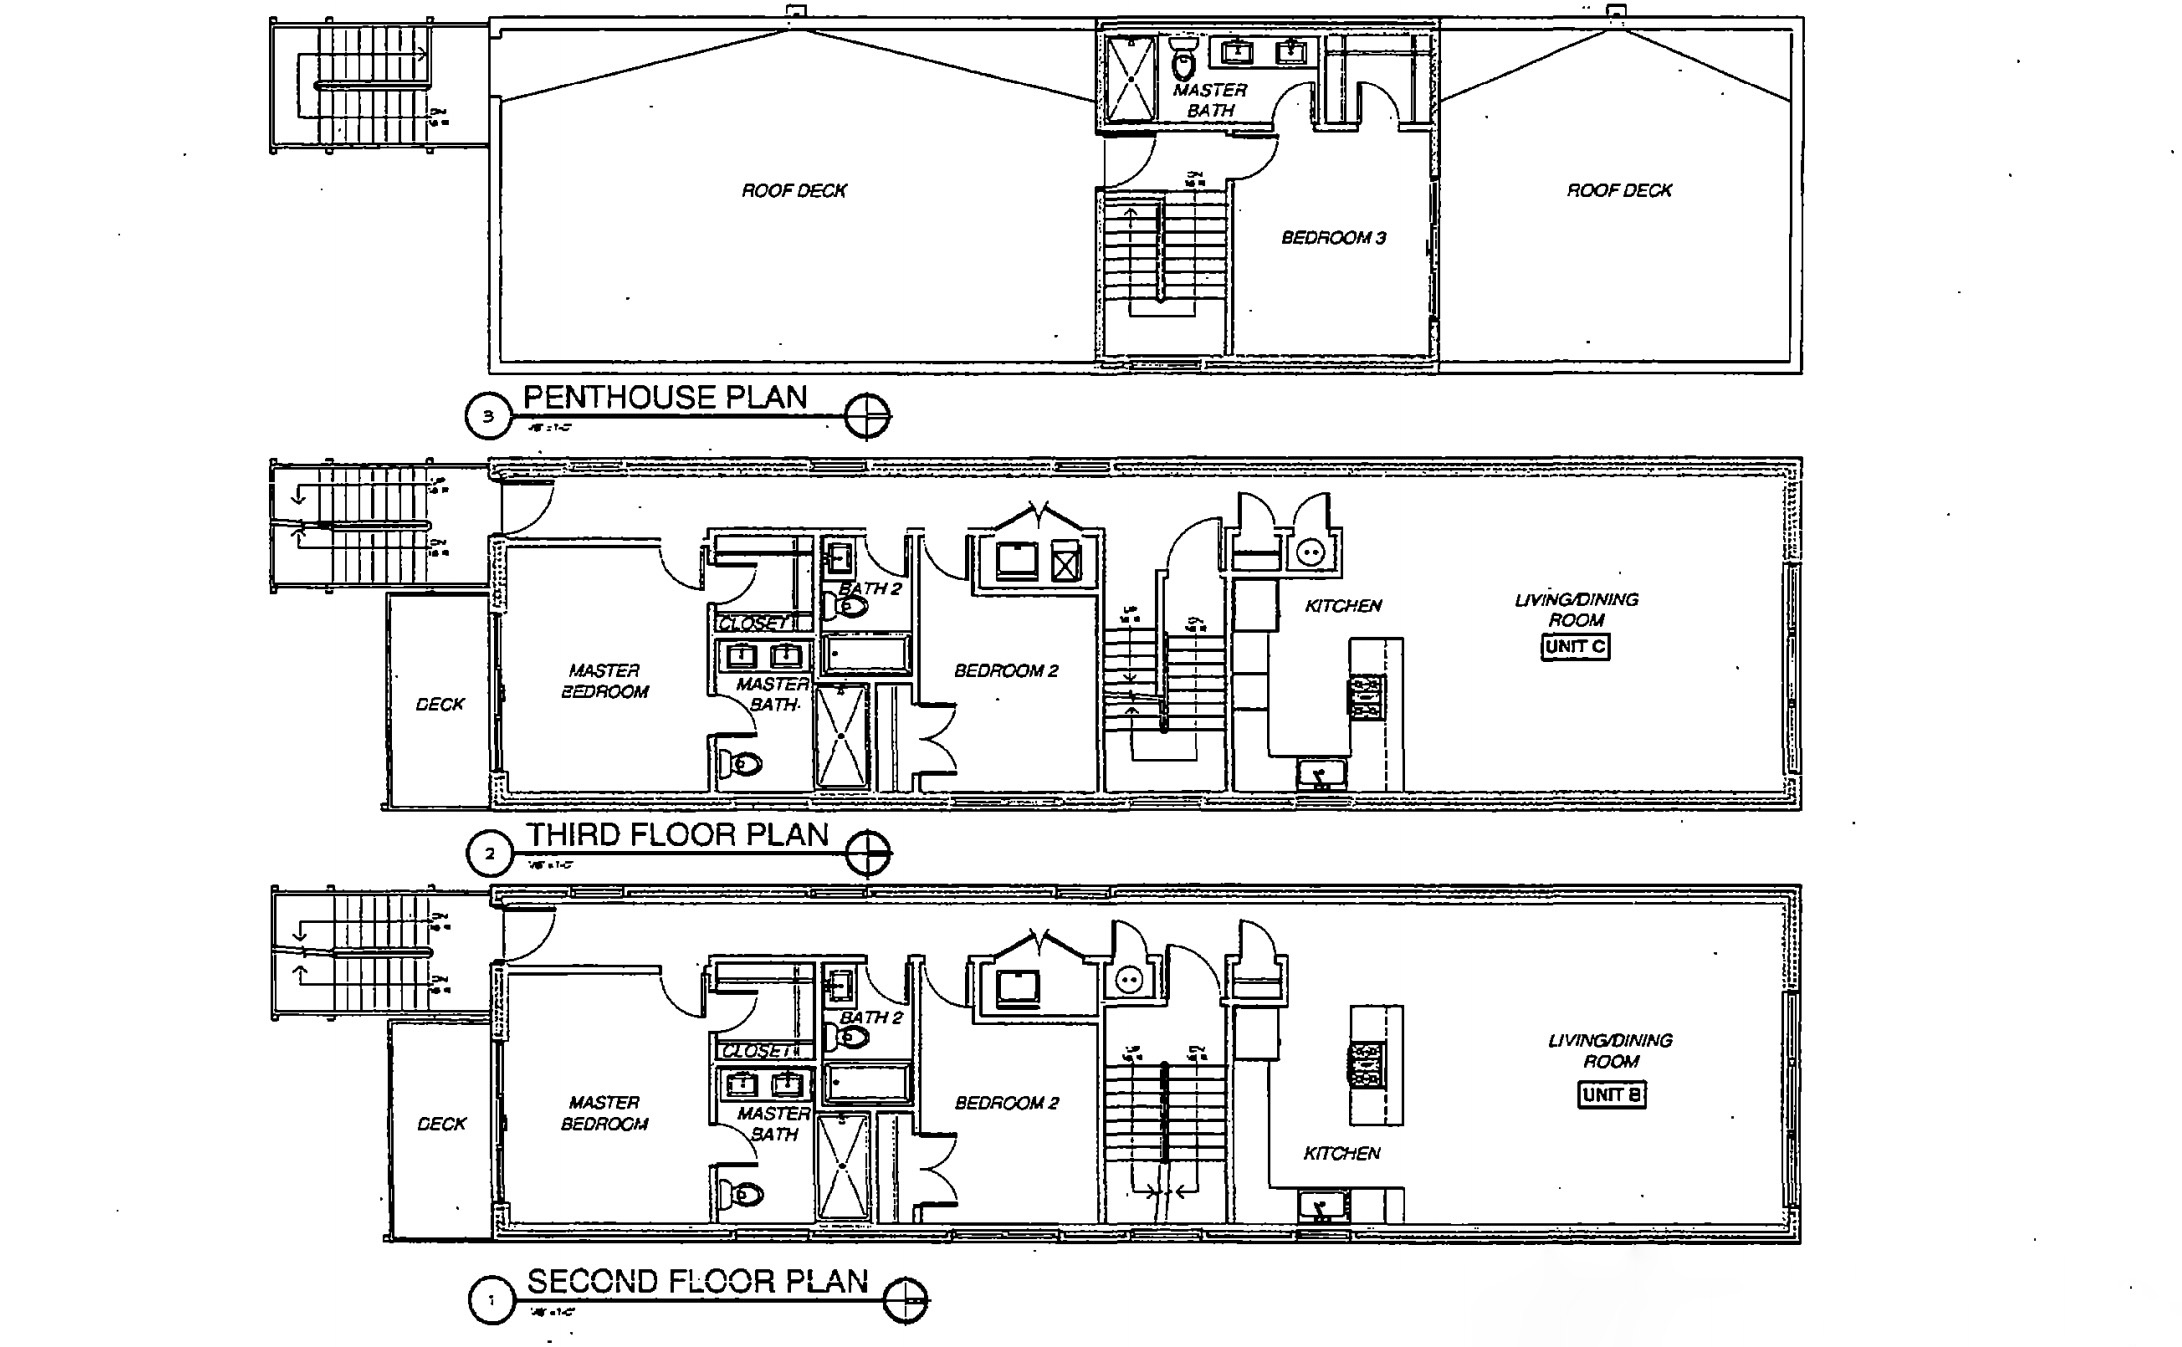 1423 W Huron Street second, third, and penthouse floor plans